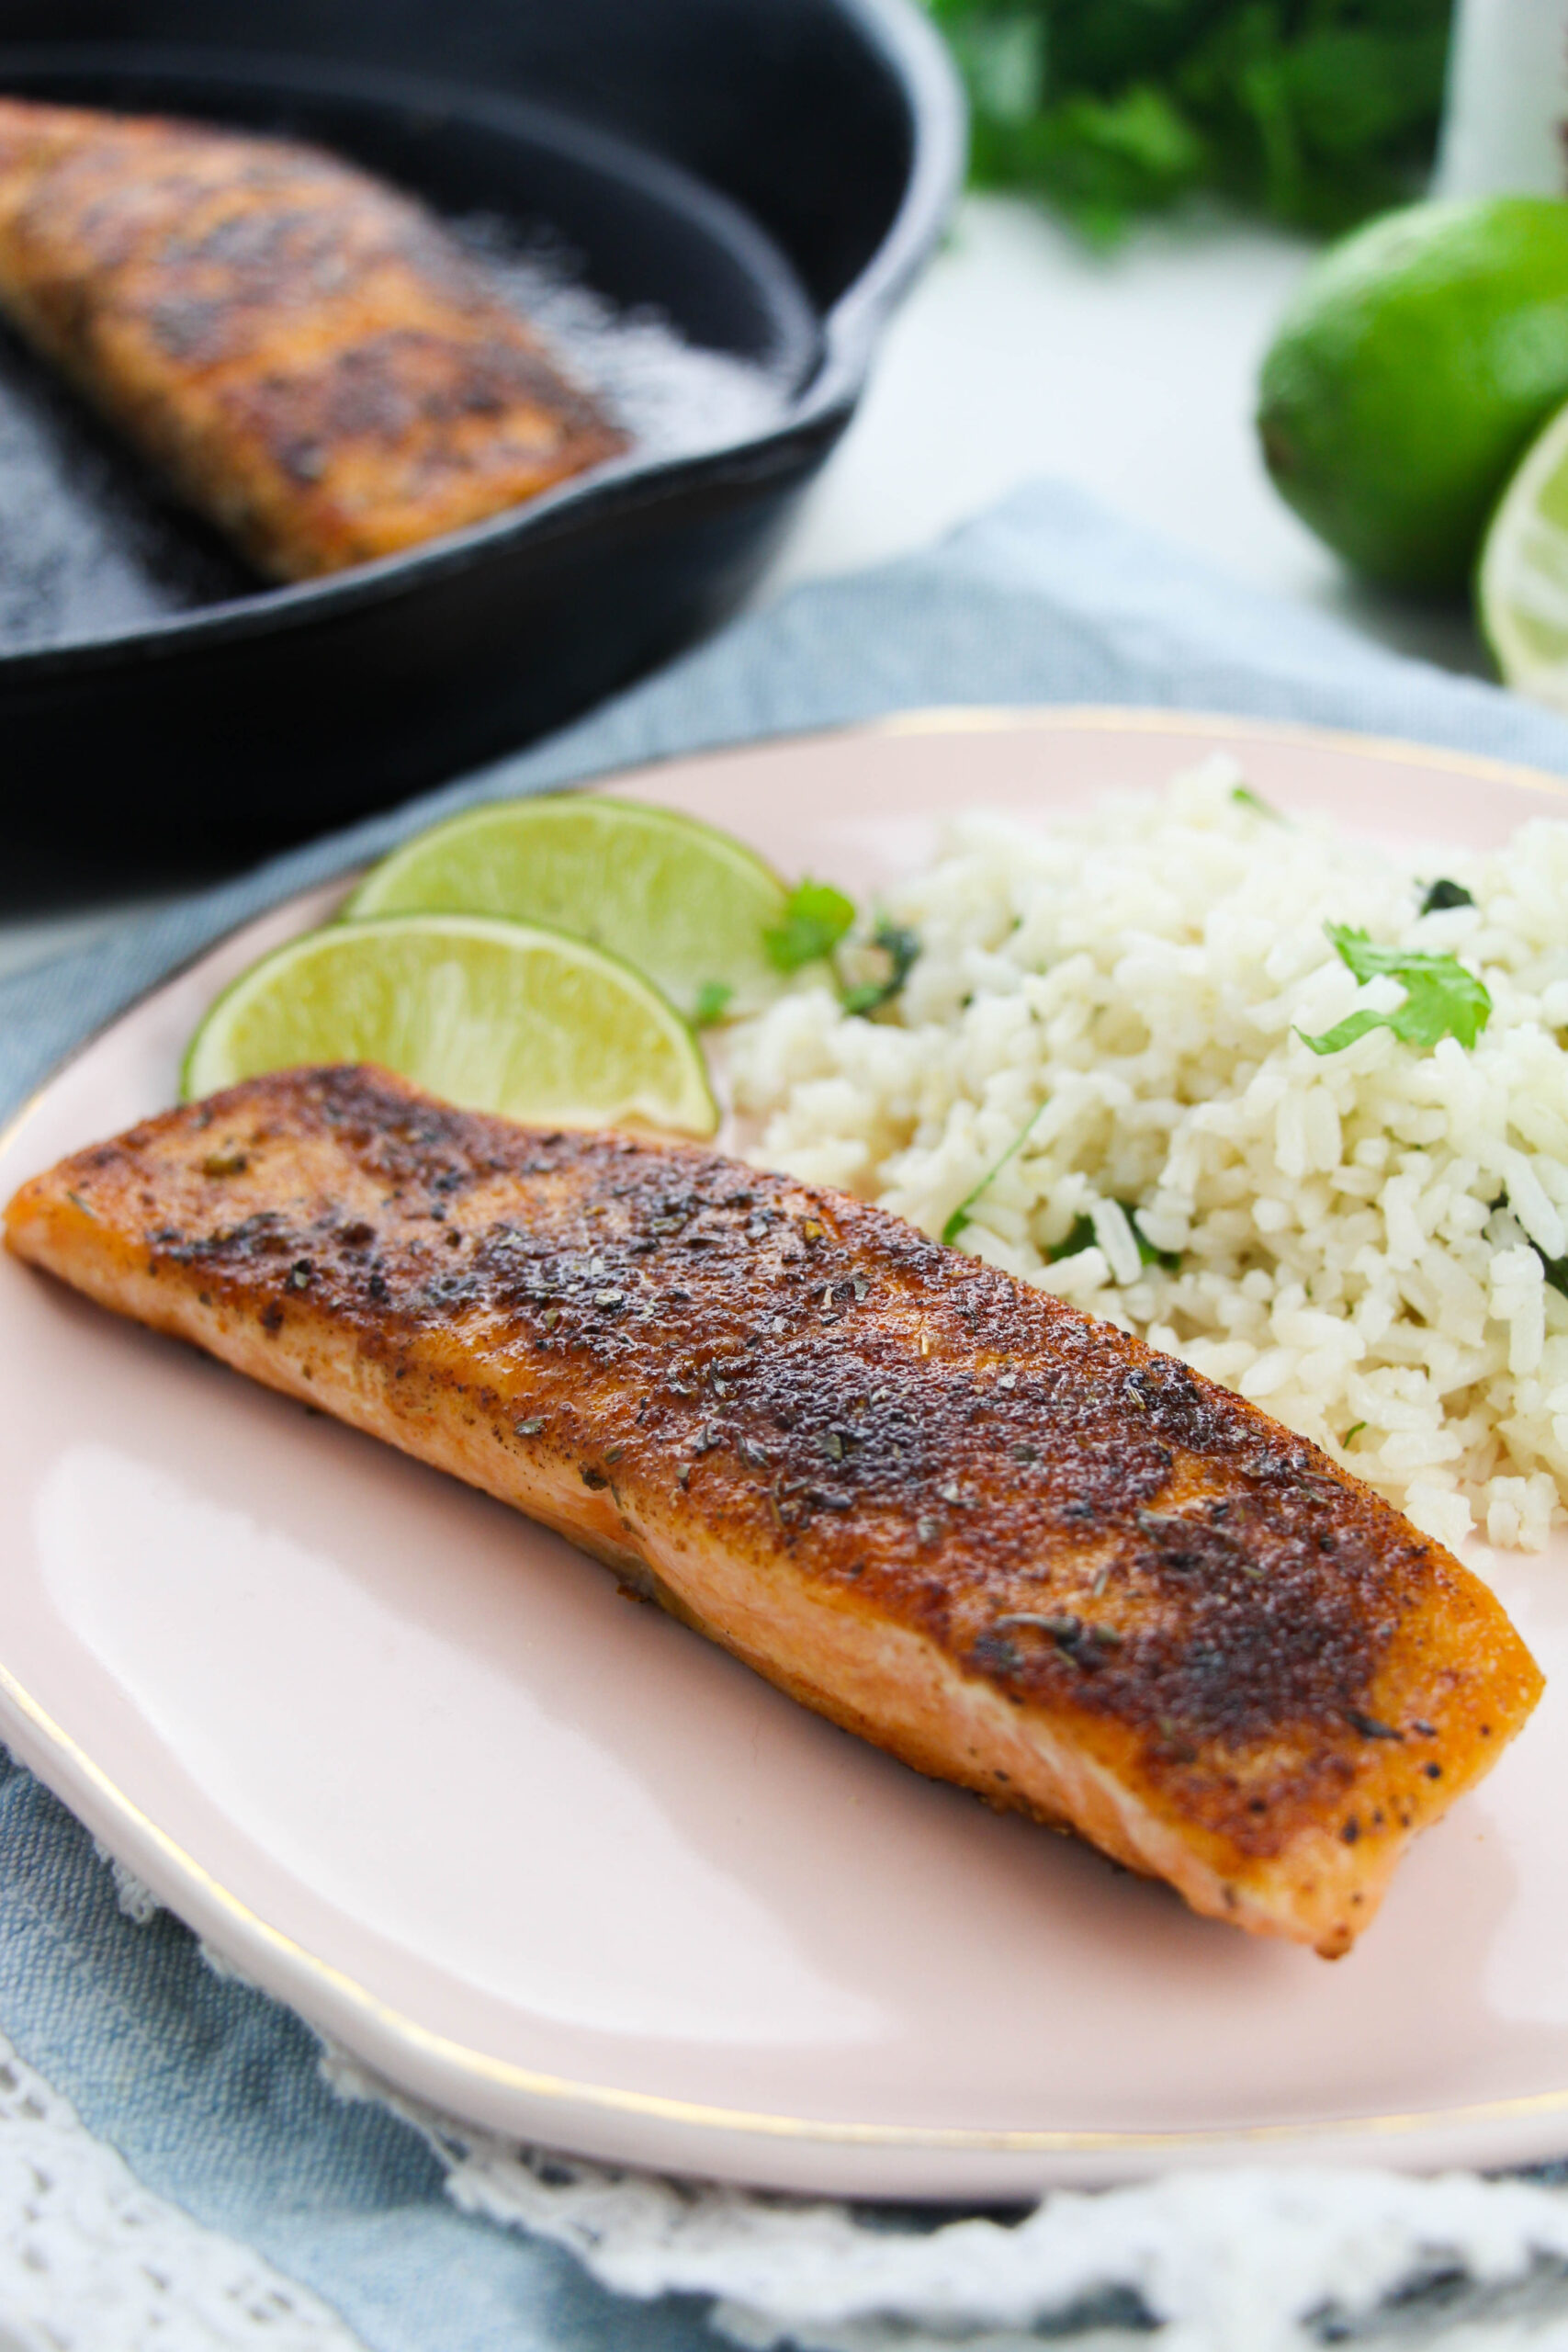 Delicious Blackened Salmon Cast Iron Skillet Recipe with 4 Ingredients